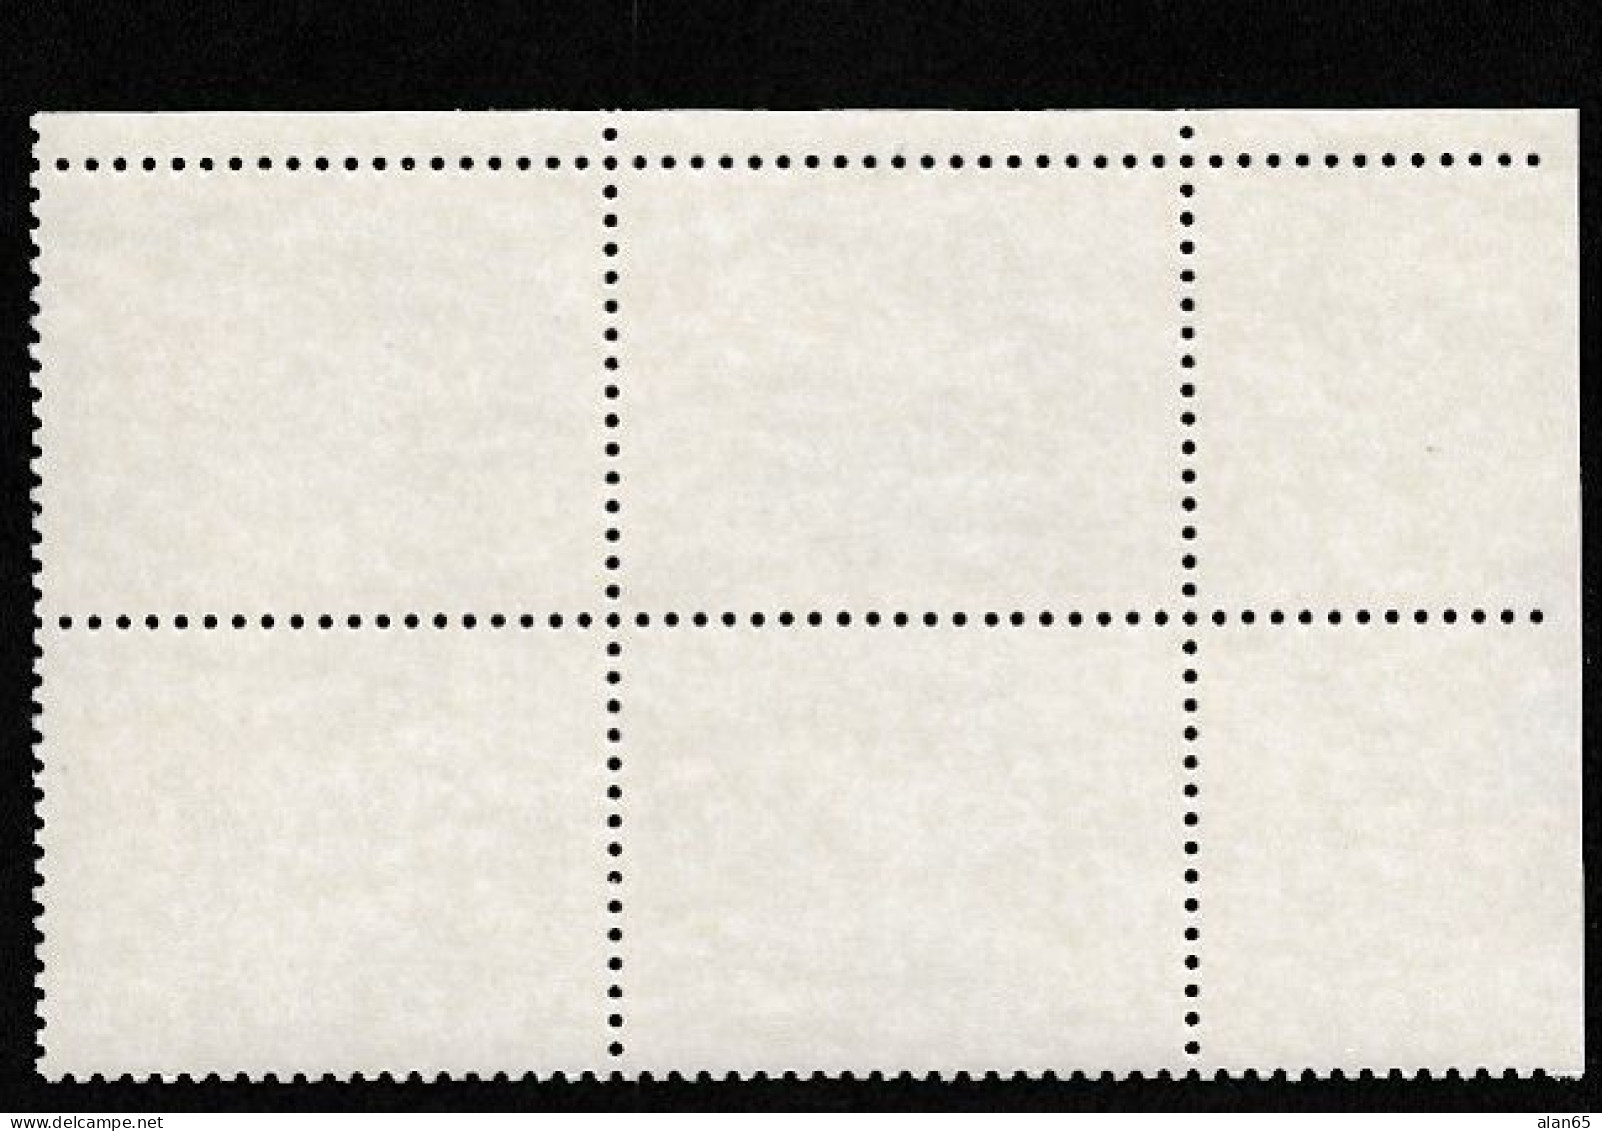 Sc#2722, Oklahoma! Musical Series, 29-cent Plate Number Block Of 4 MNH Stamps - Plate Blocks & Sheetlets